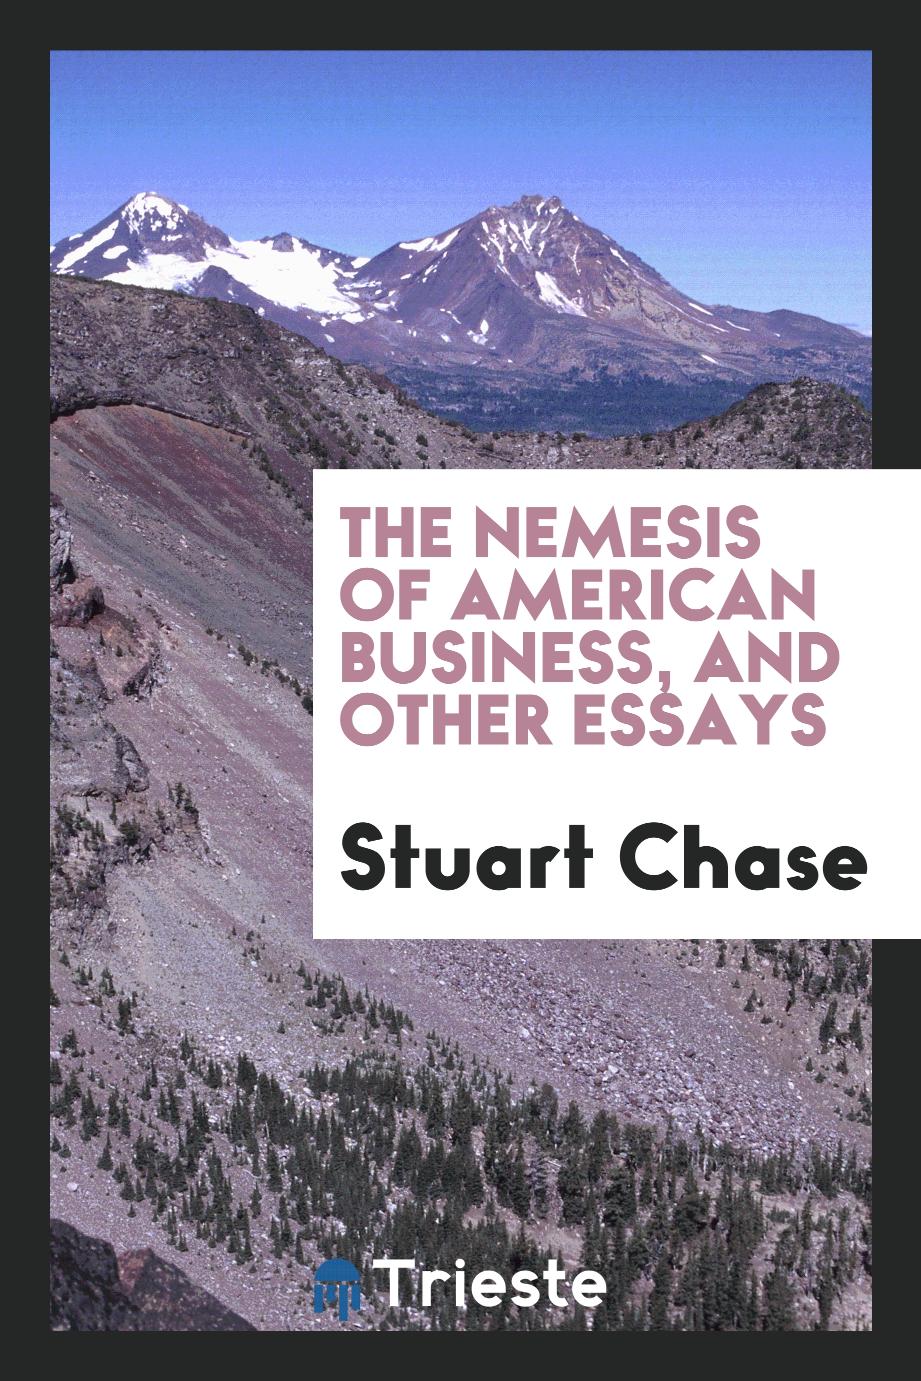 The nemesis of American business, and other essays